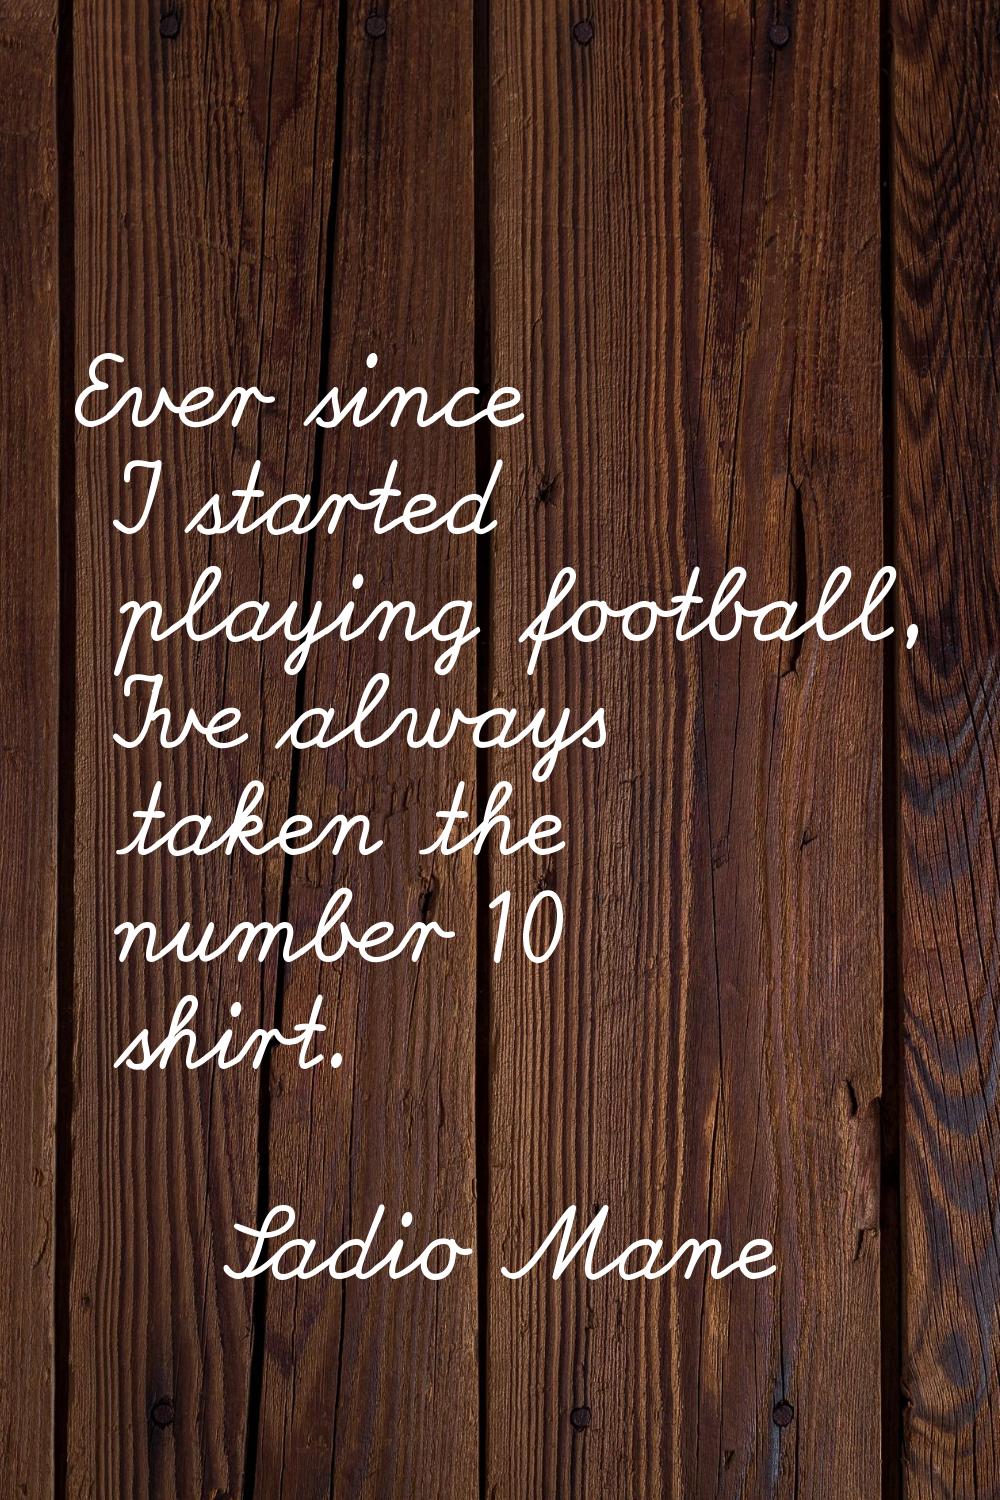 Ever since I started playing football, I've always taken the number 10 shirt.